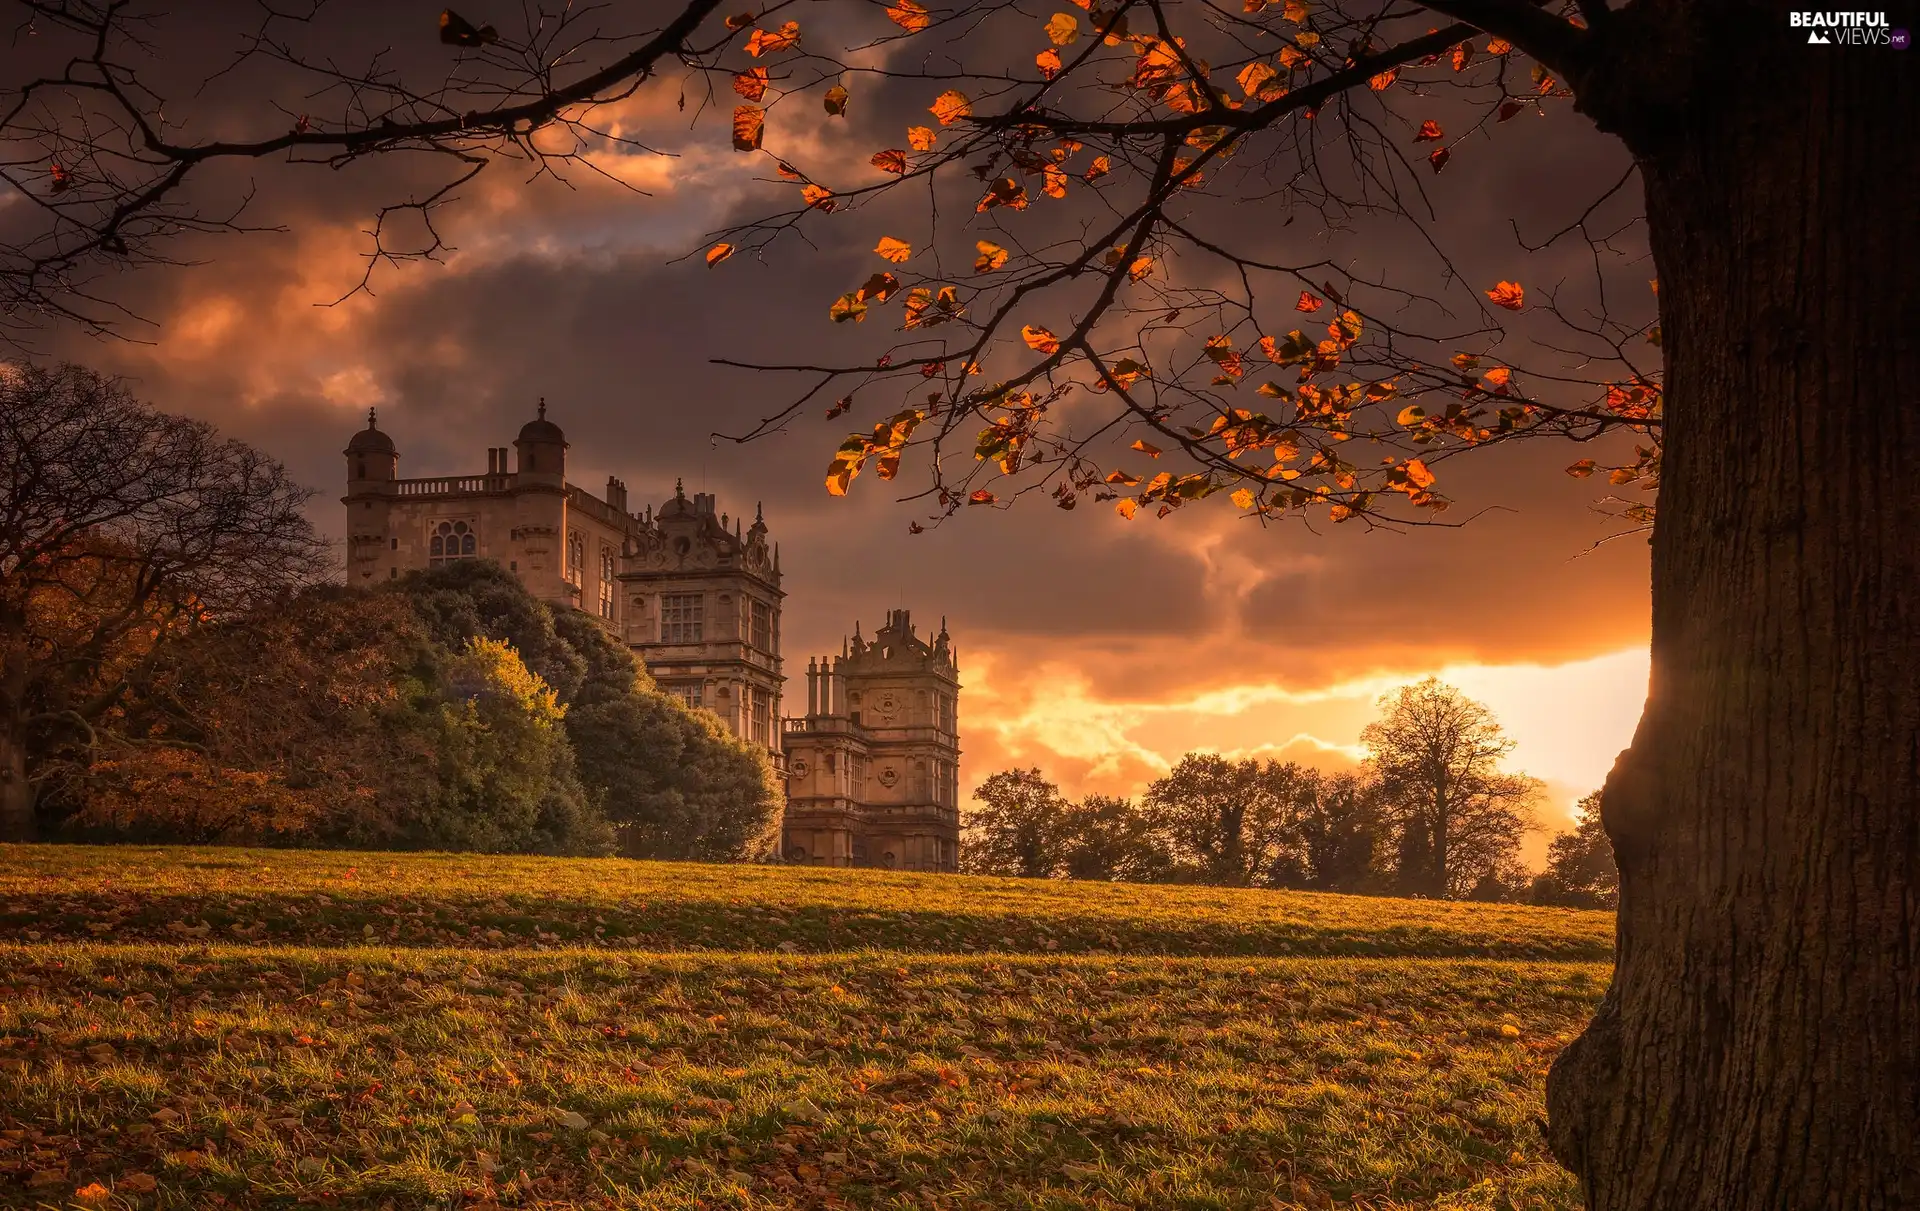 Wollaton Hall Museum, Nottingham Natural History Museum, Great Sunsets, autumn, viewes, Nottingham, England, trees